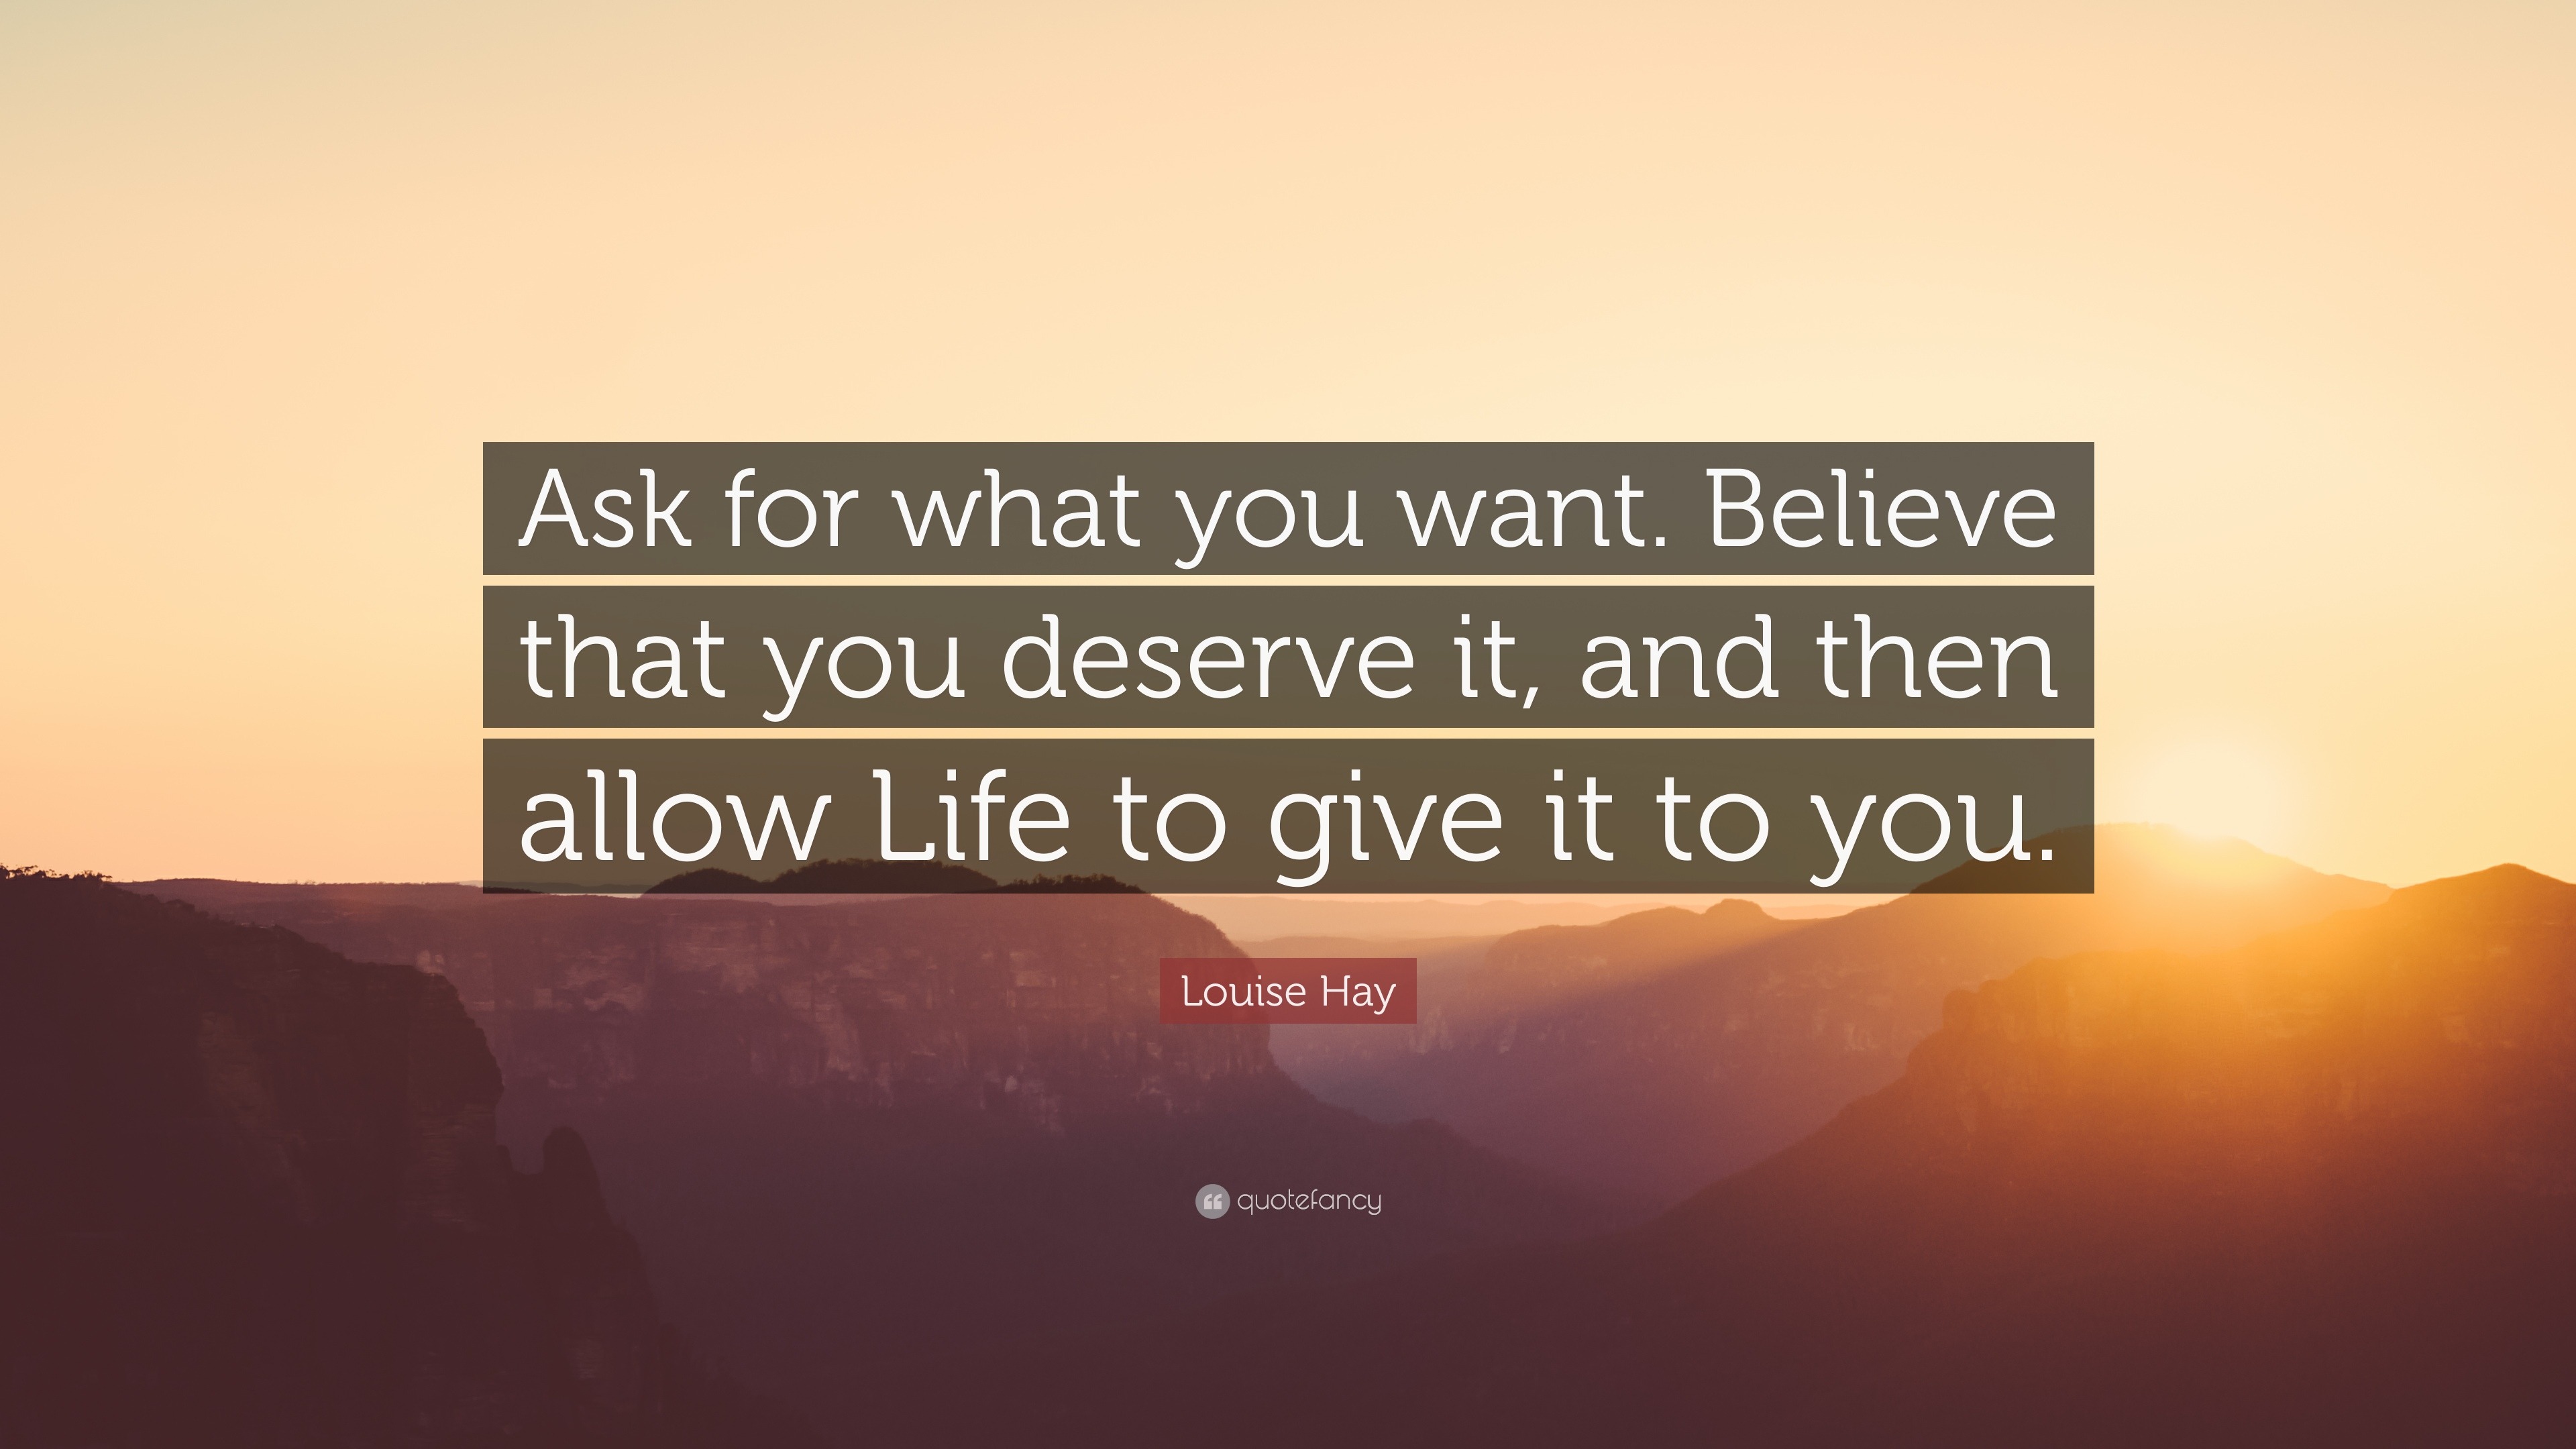 Louise Hay Quote: “Ask for what you want. Believe that you deserve ...